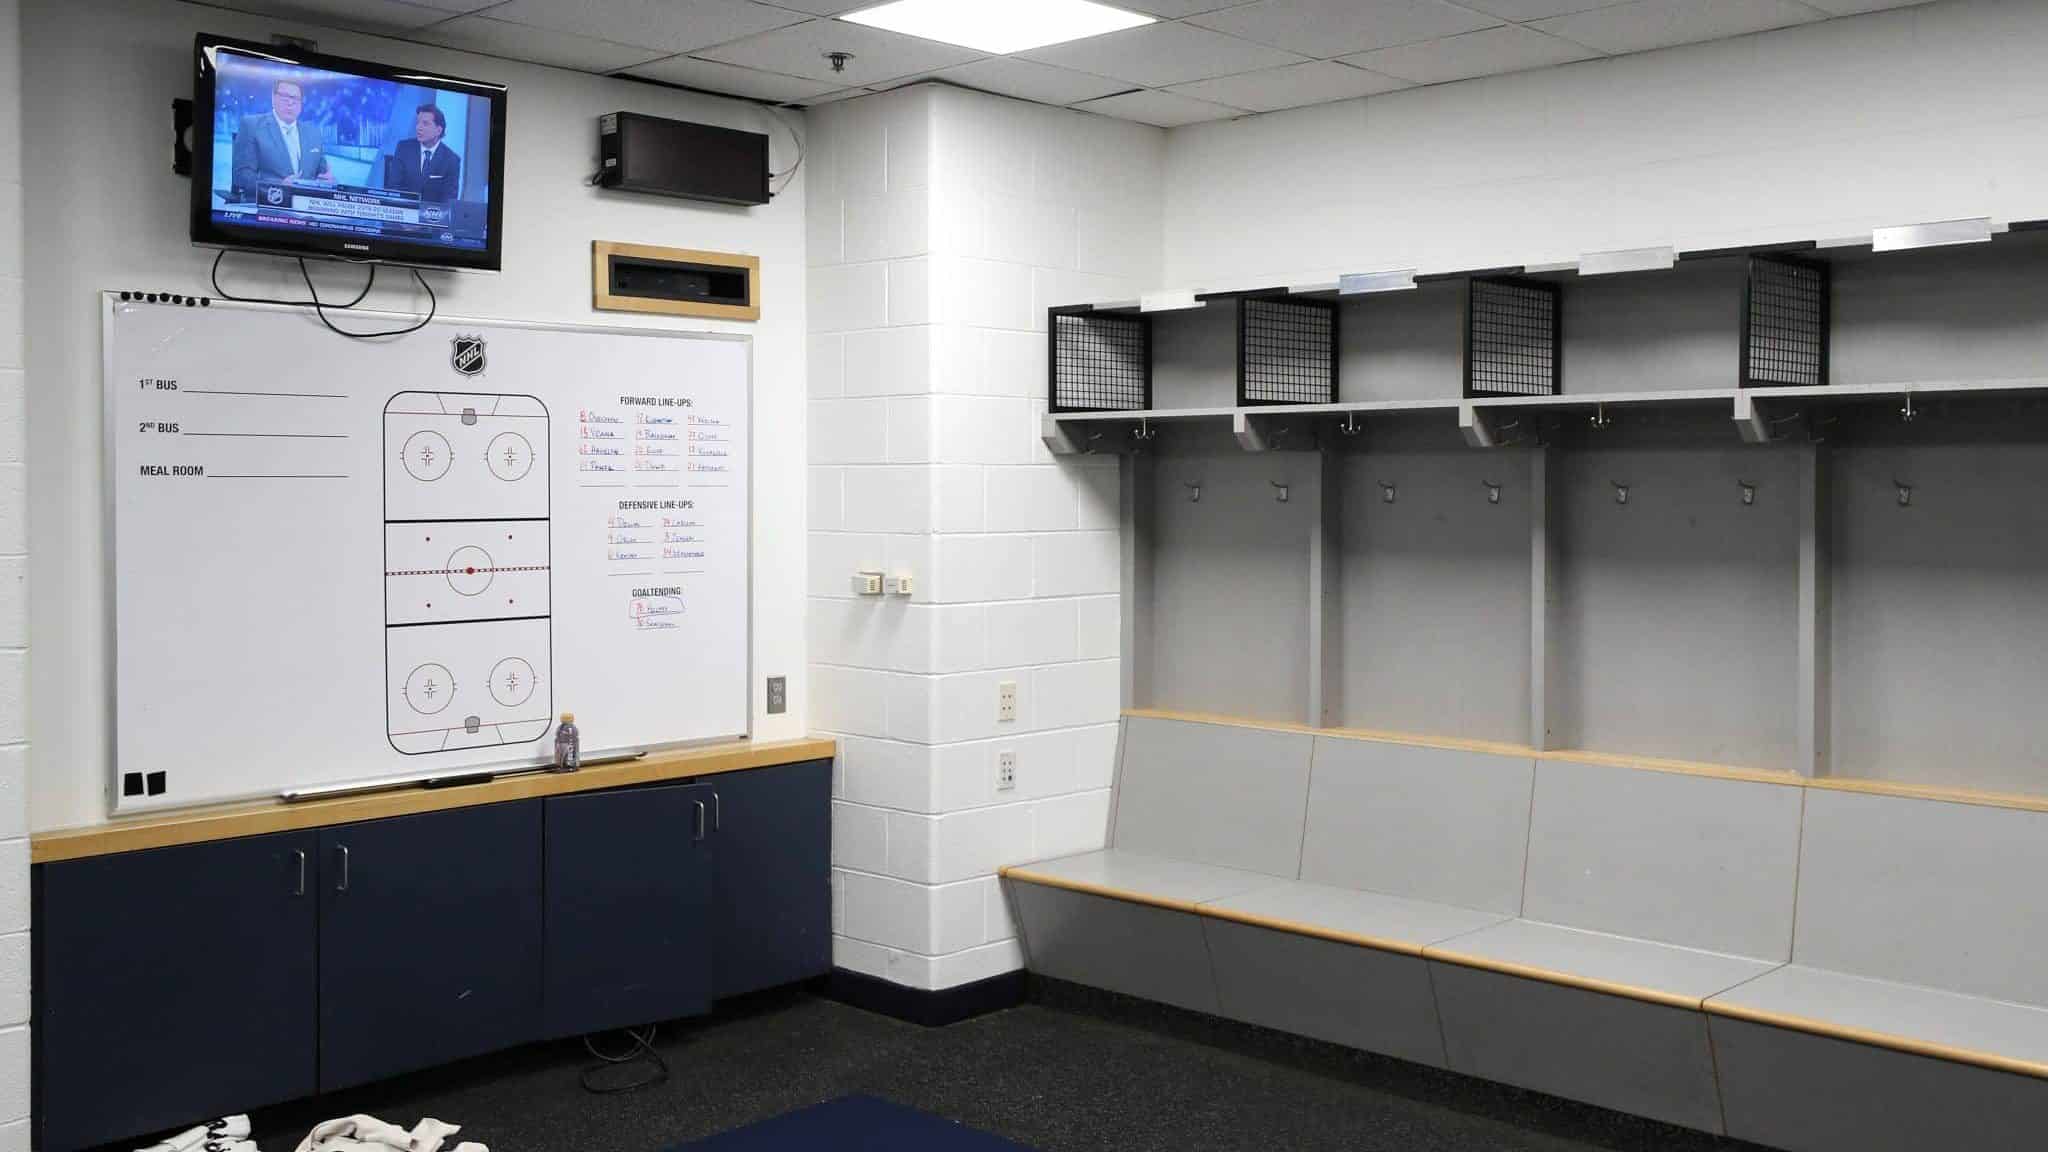 WASHINGTON, DC - MARCH 12: The visitors locker-room is empty after the Detroit Red Wings against the Washington Capitals game was postponed due to the coronavirus at Capital One Arena on March 12, 2020 in Washington, DC. Today the NHL announced is has suspended their season due to the uncertainty of the coronavirus (COVID-19) with hopes of returning. The NHL currently joins the NBA, MLS, as well as, other sporting events and leagues around the world suspending play because of the coronavirus outbreak.